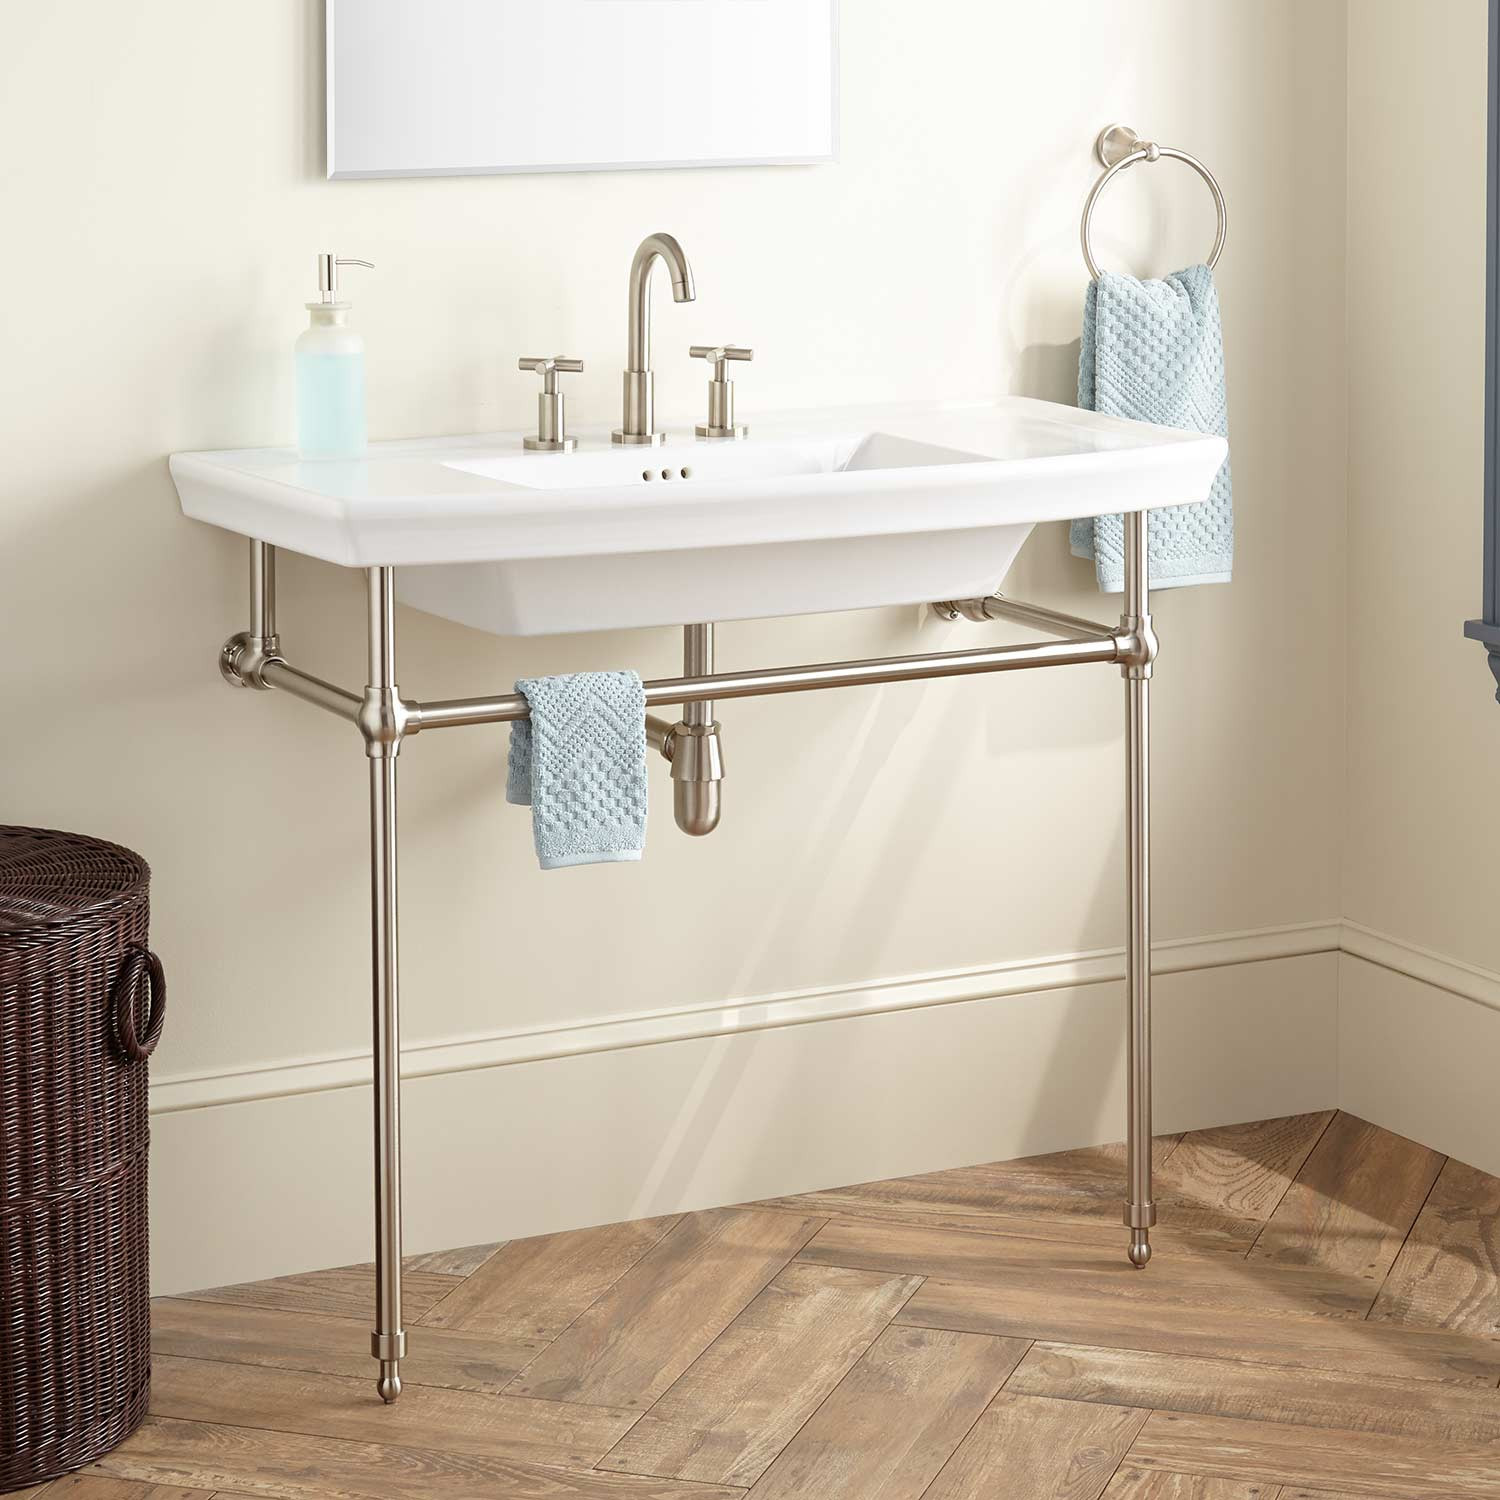 Console Sink Bathroom
 Olney Porcelain Console Sink with Brass Stand Bathroom